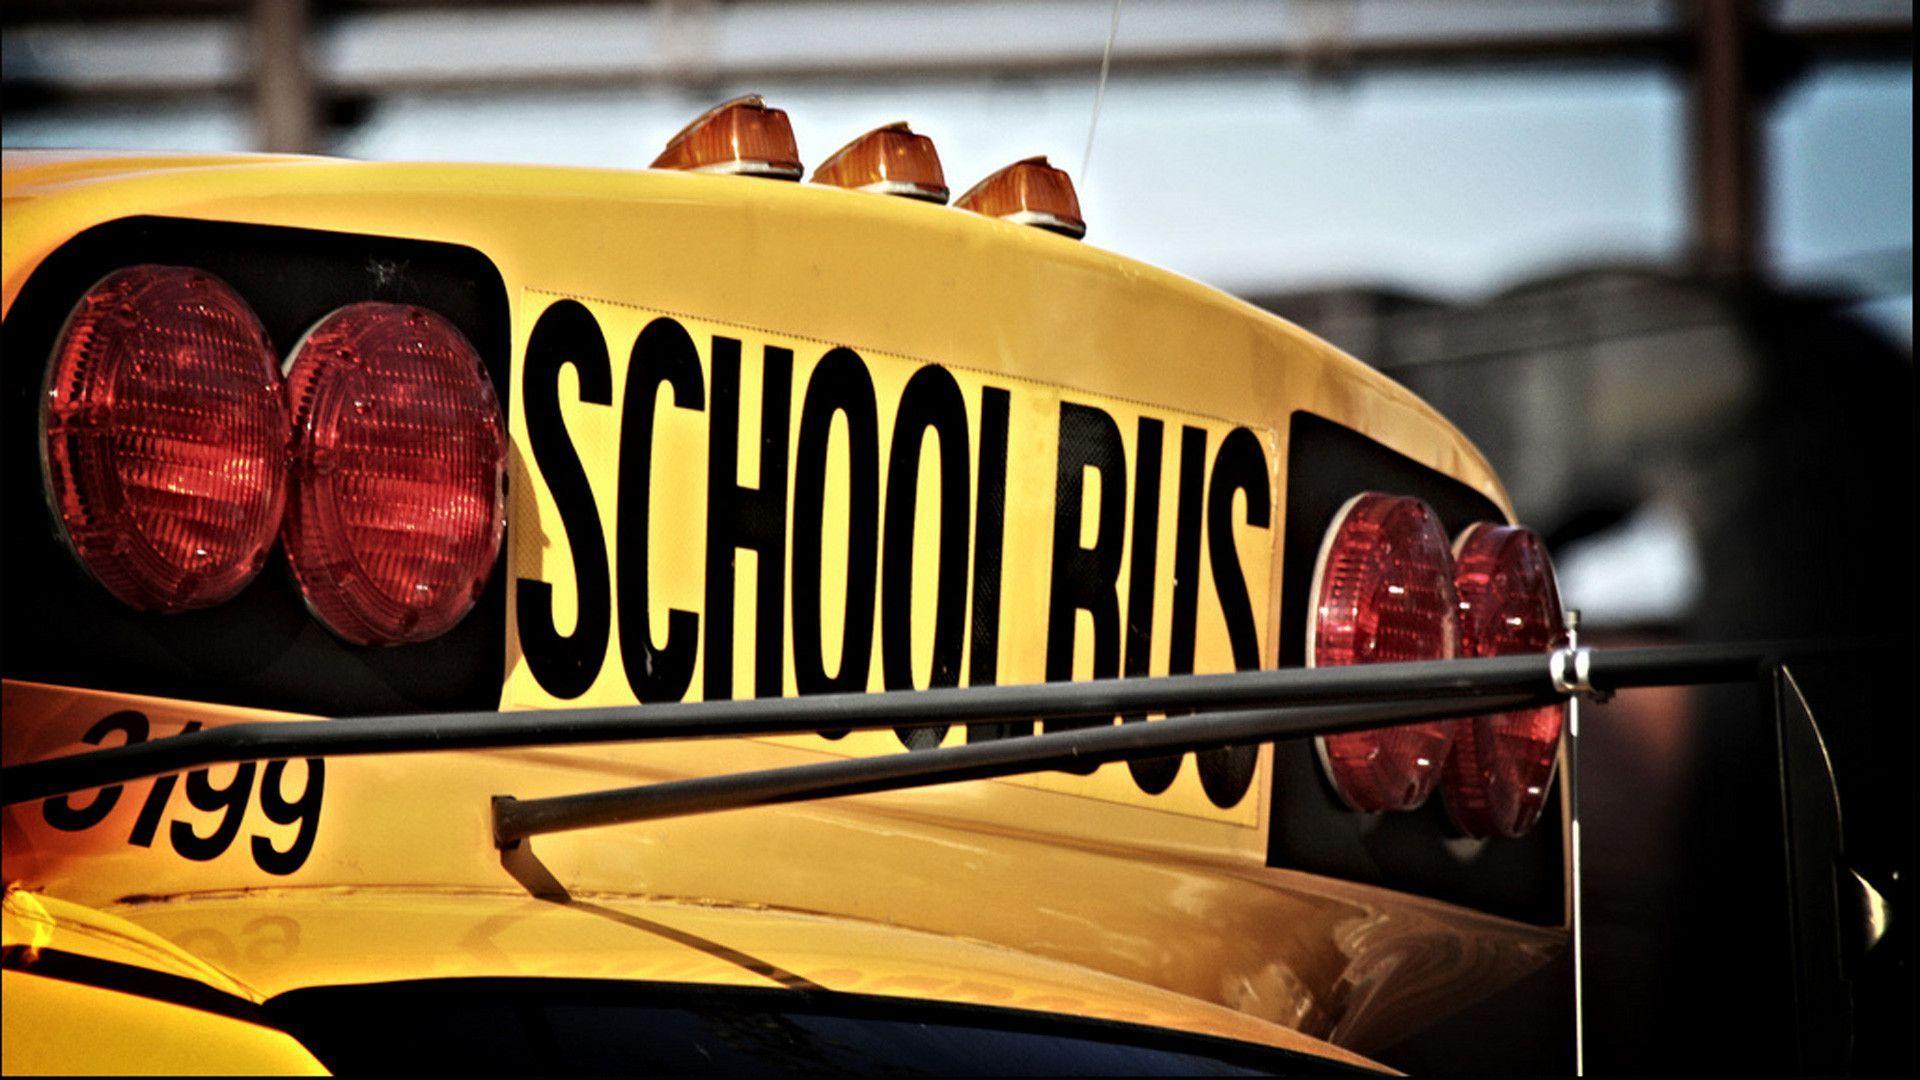 Boy, Injured After Being Hit by School Bus in Fontana